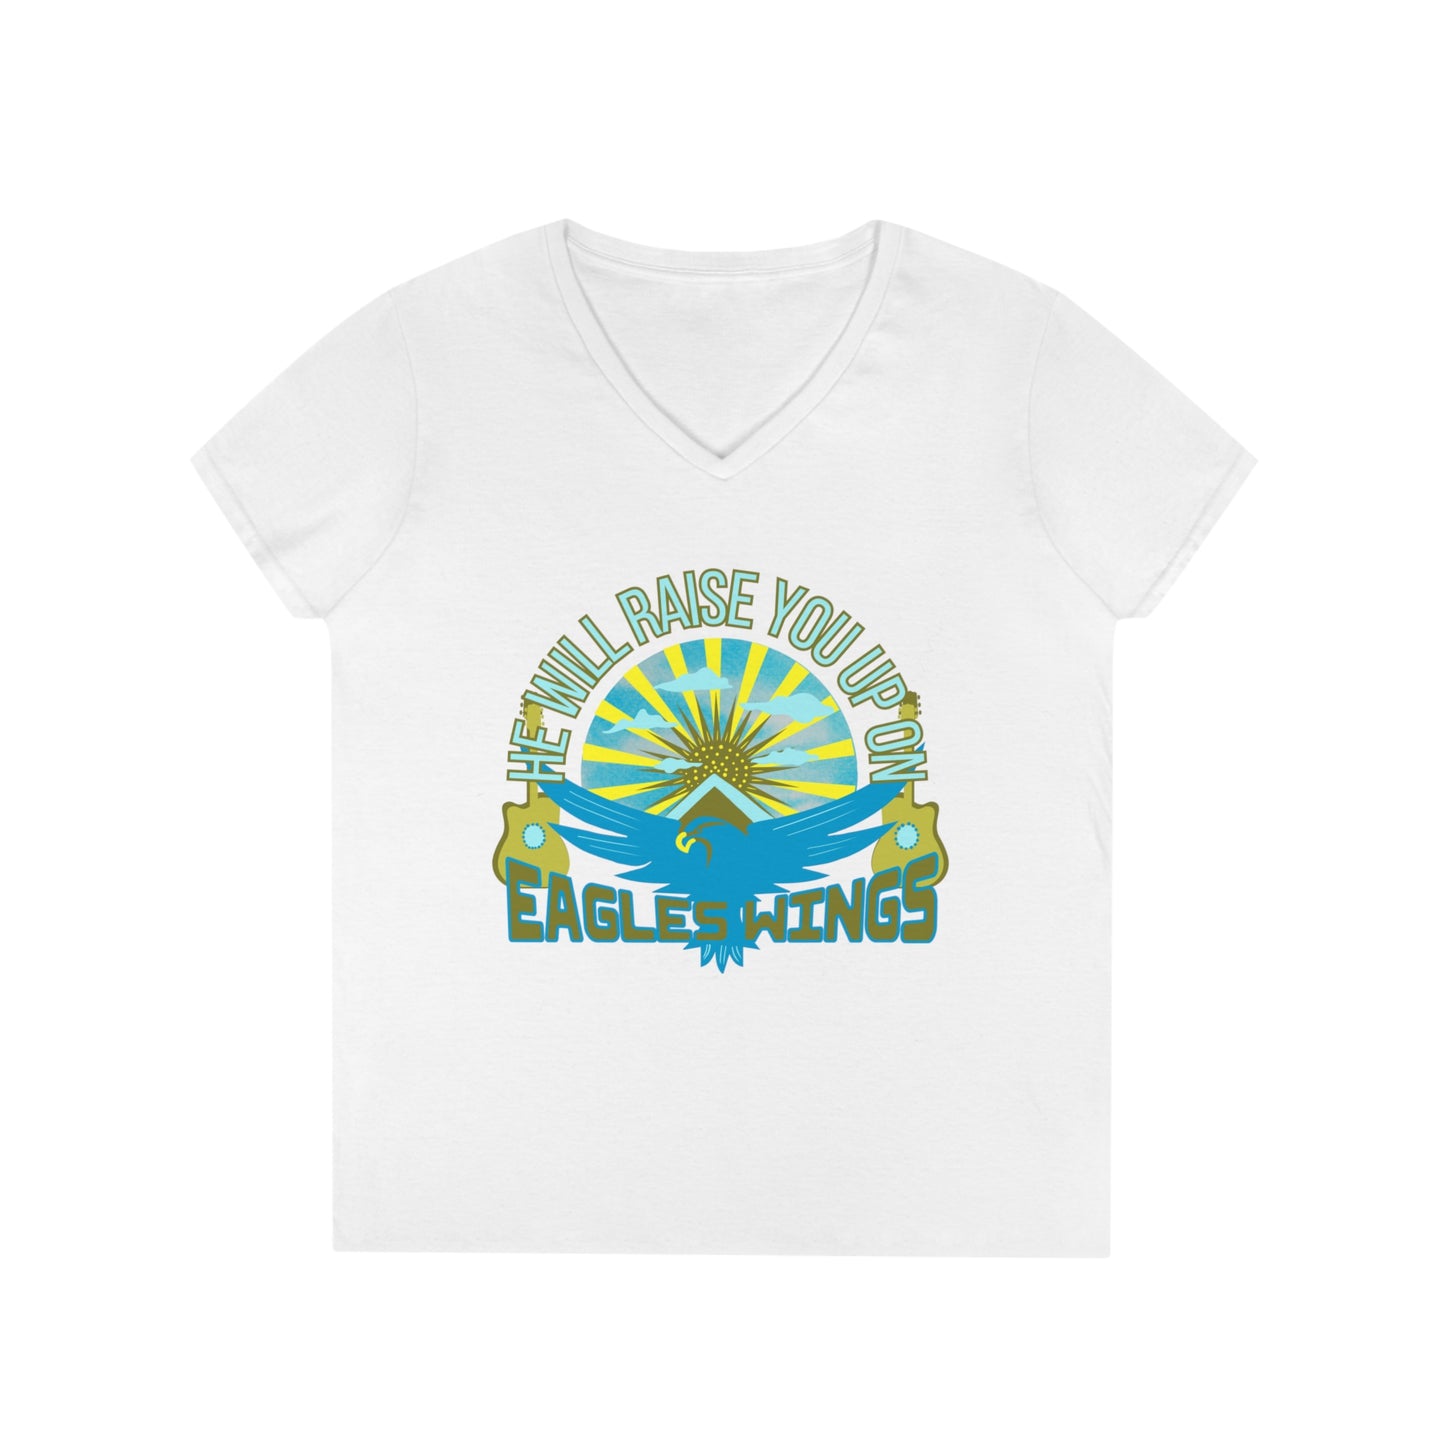 Raise You Up On Eagle's Wings Ladies' V-Neck T-Shirt (Green Pastures Apparel)